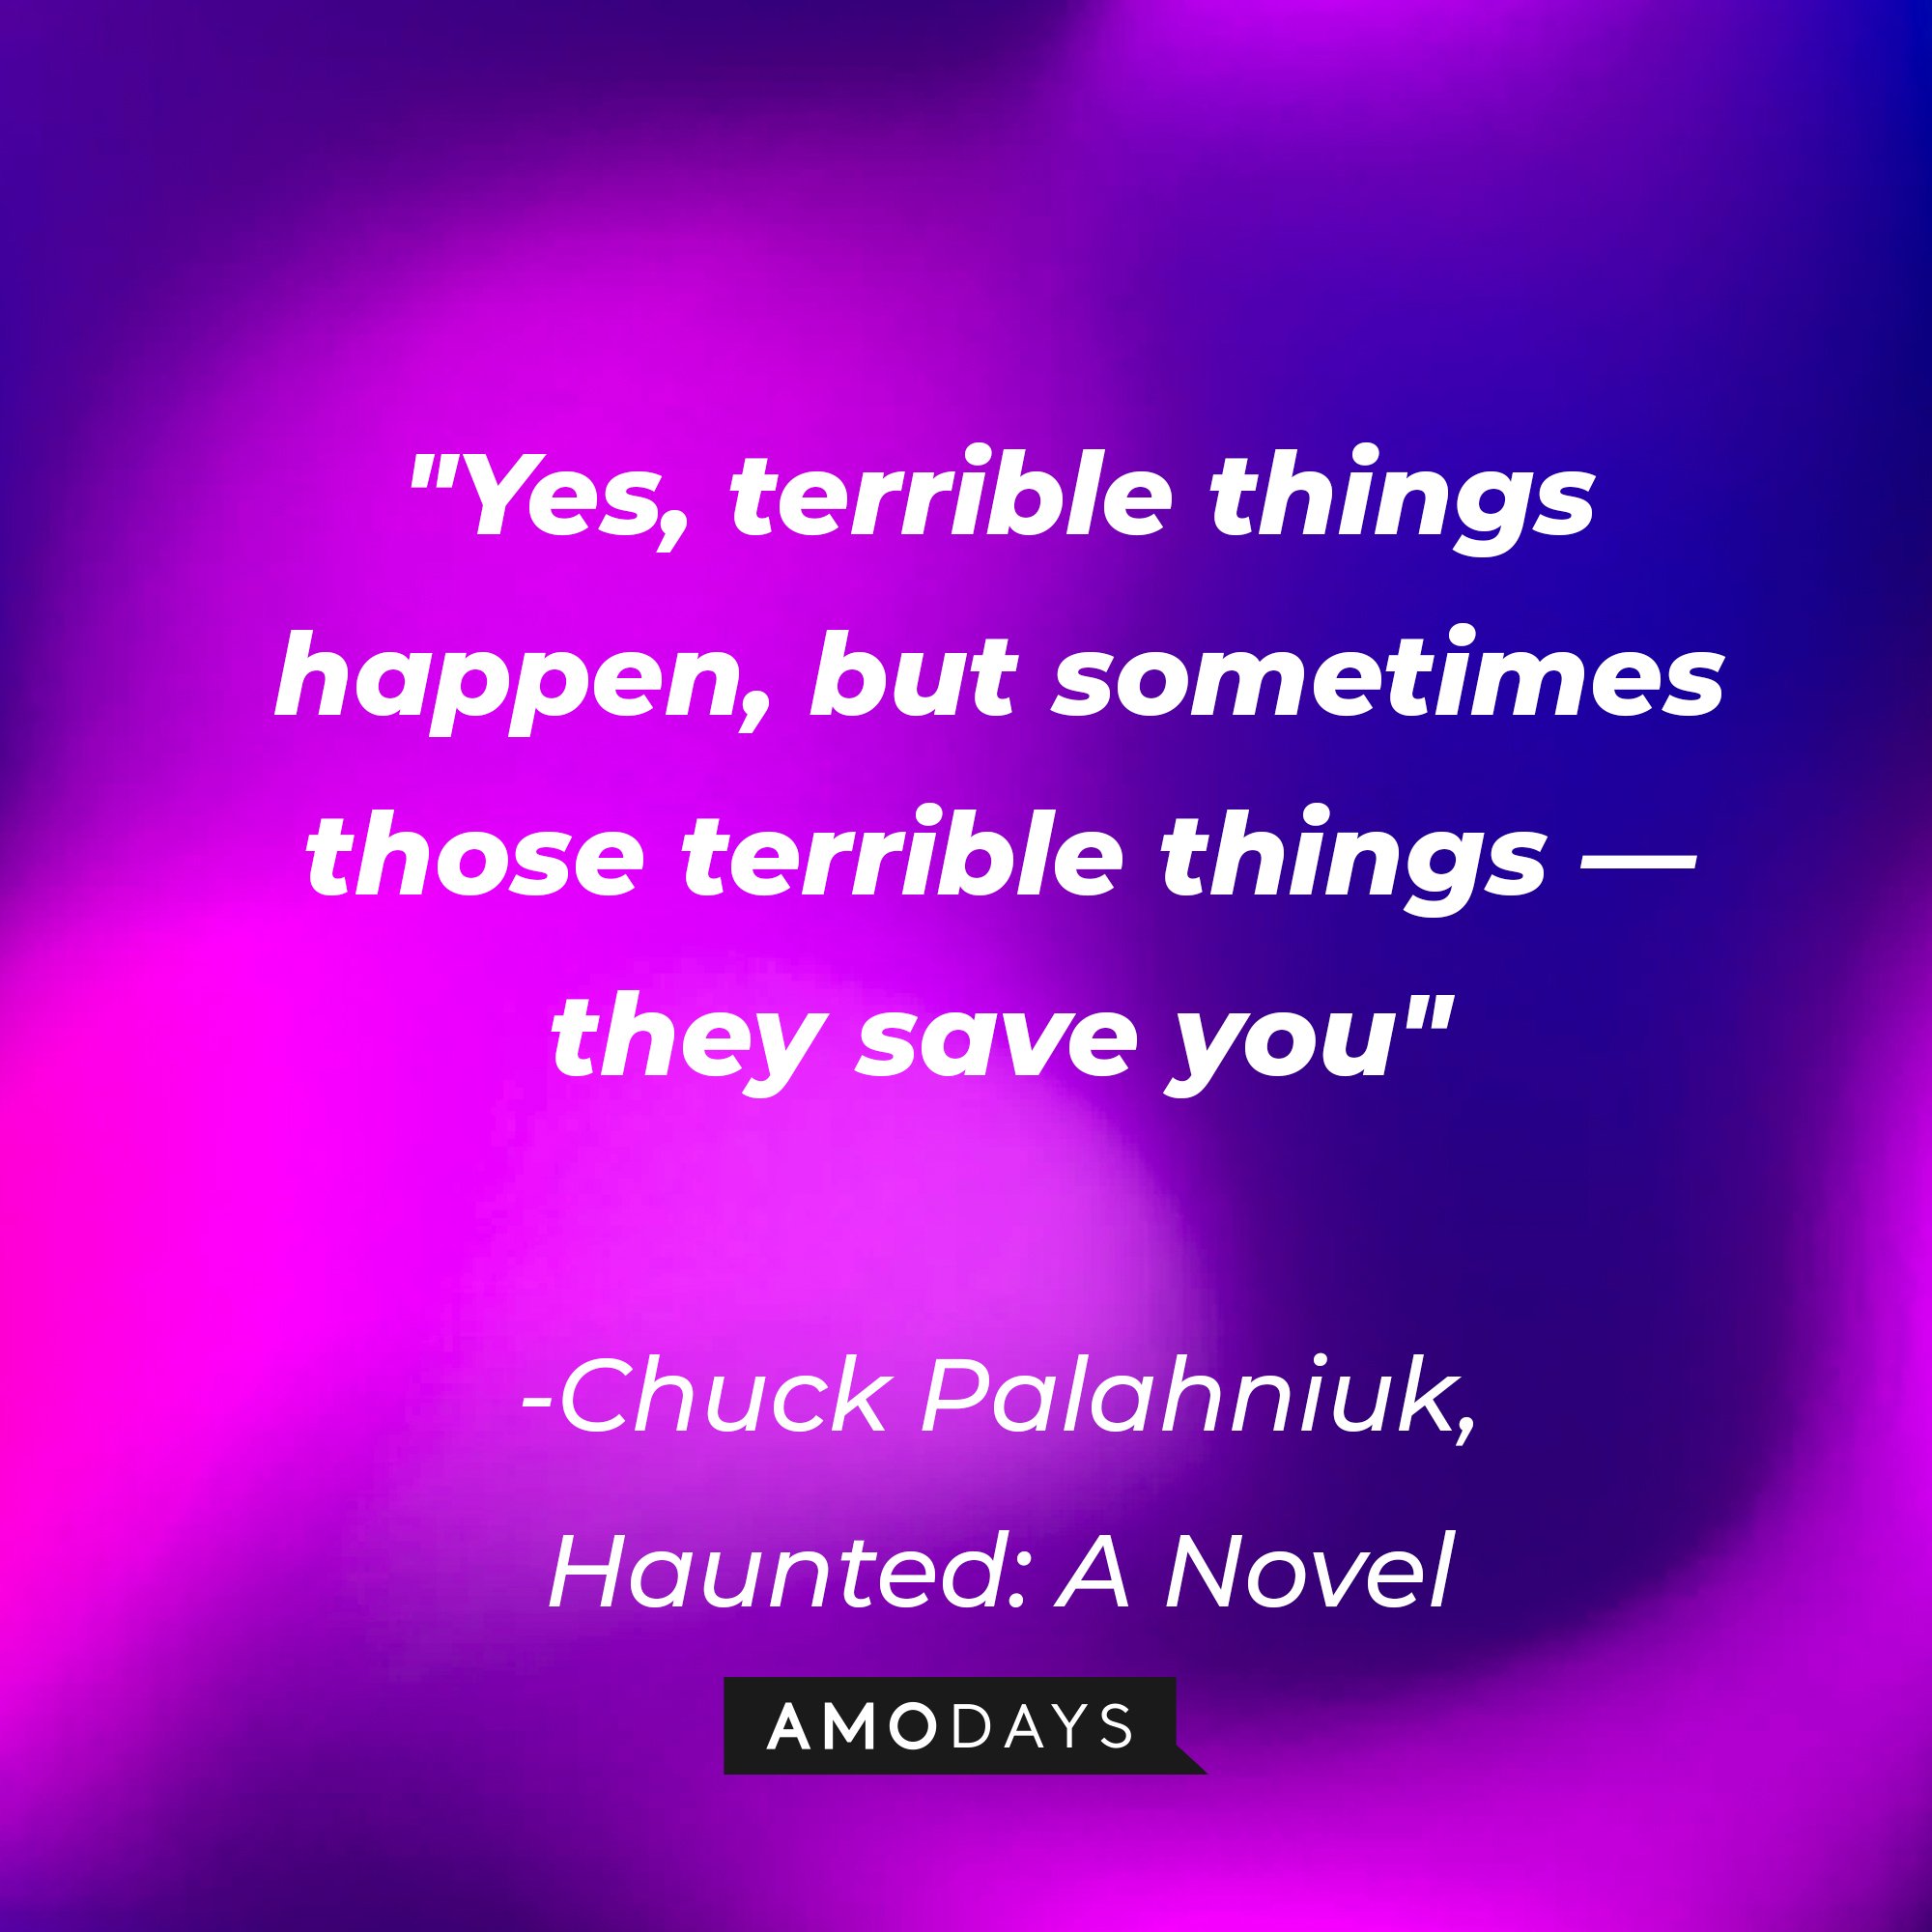 Chuck Palahniuk's quote: "Yes, terrible things happen, but sometimes those terrible things ― they save you." | Image: Amodays